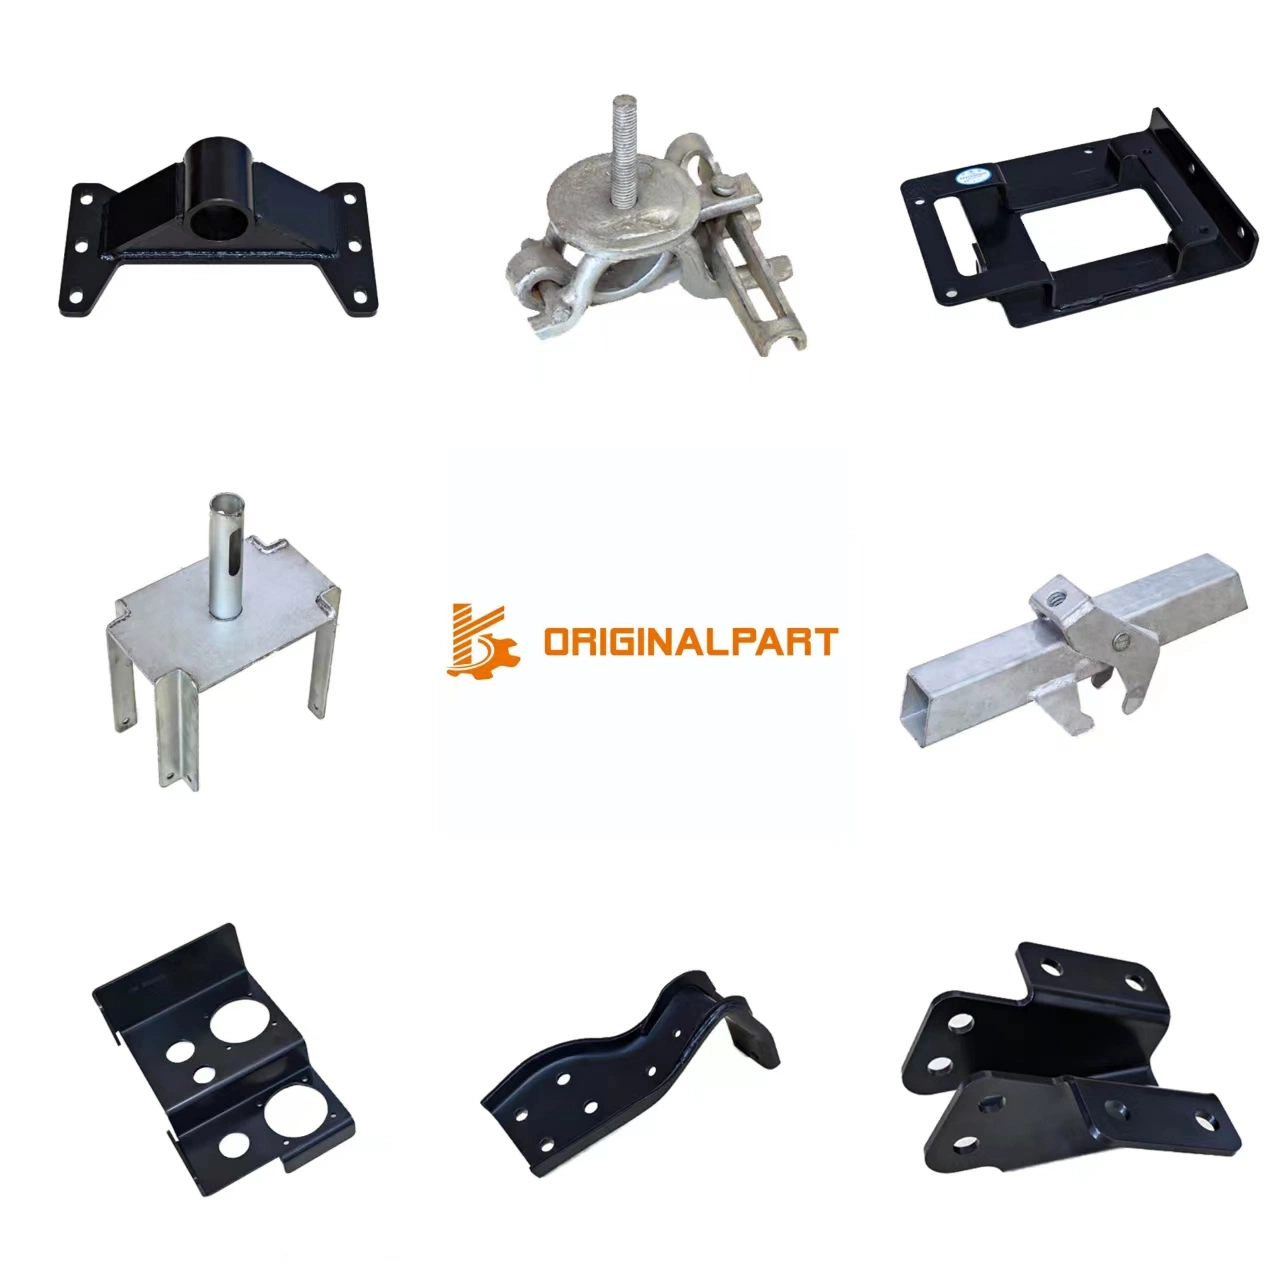 Customizable Automobile Component Automobile Components Forgings Parts CNC Machine Forging Parts Combination Switch Bracket of Trucks and Trailers Stamping